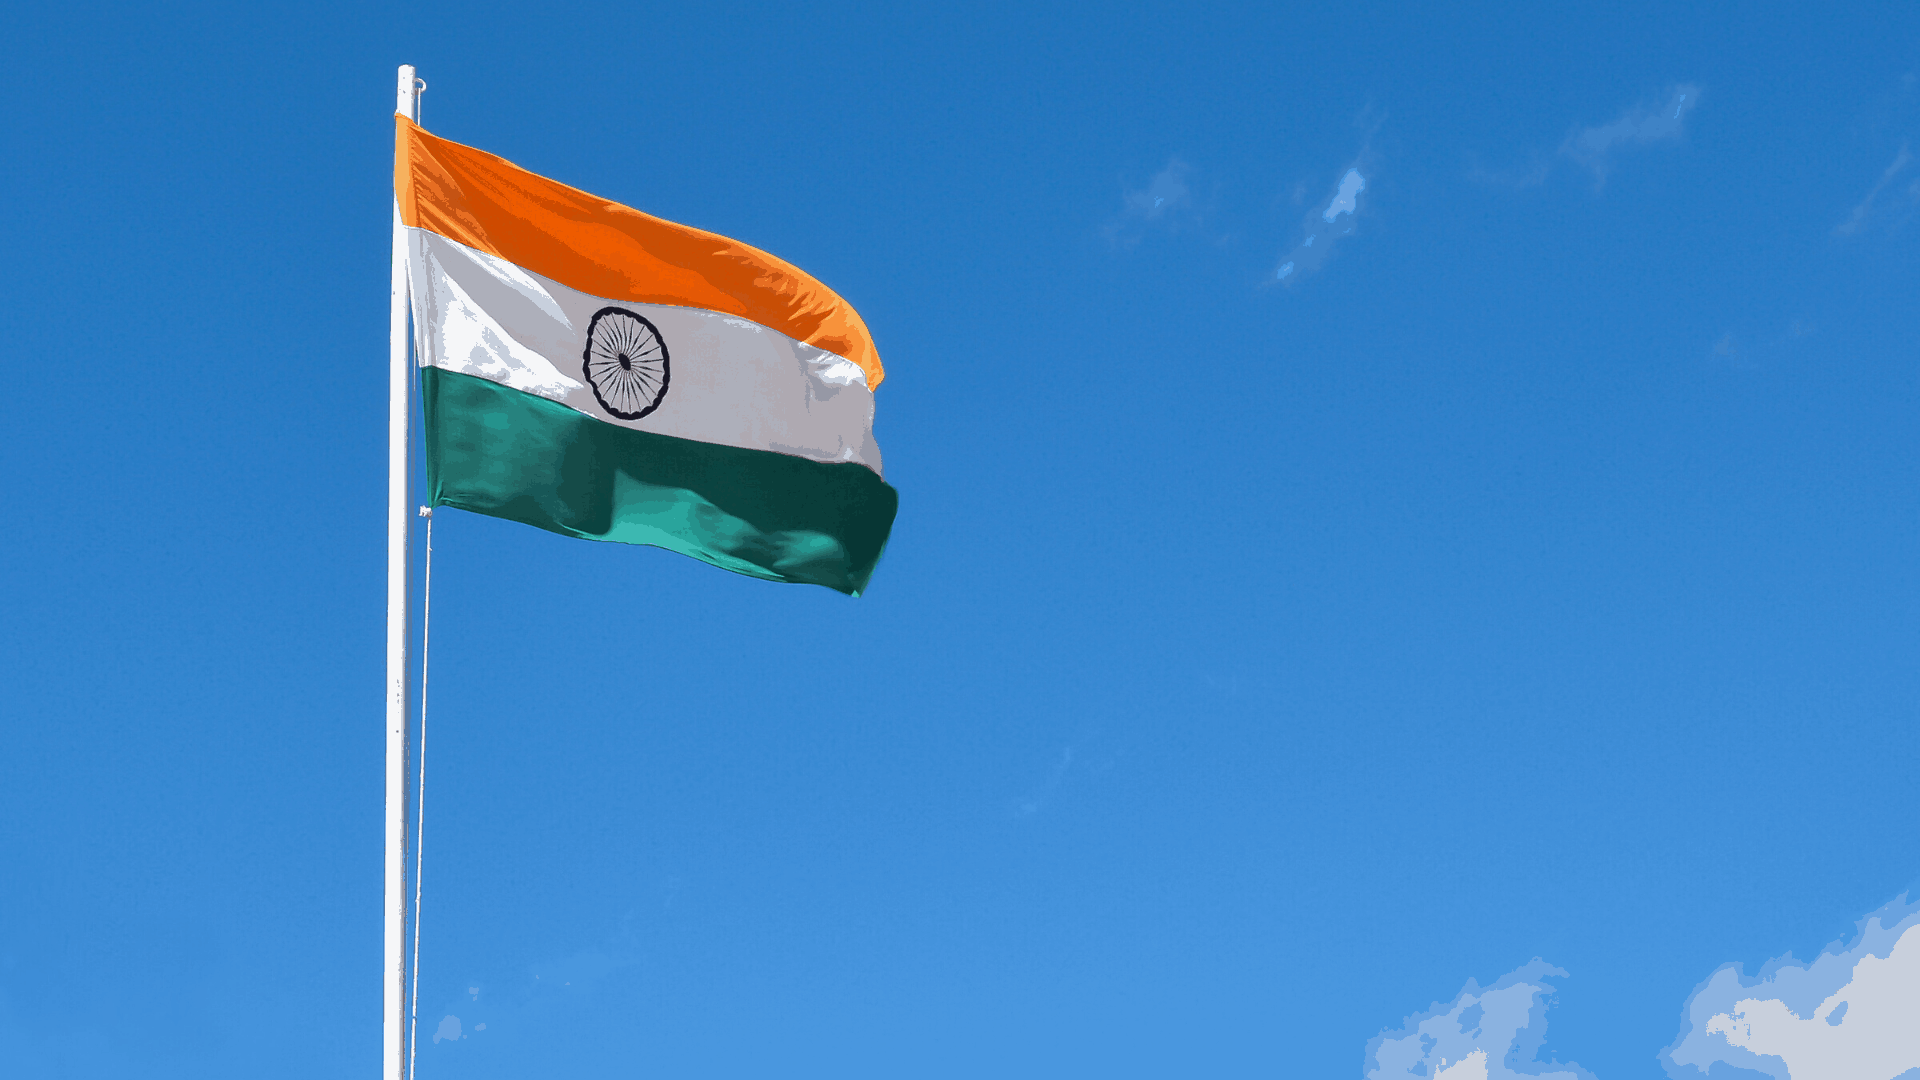 India Independence Day Pictures | Download Free Images on Unsplash